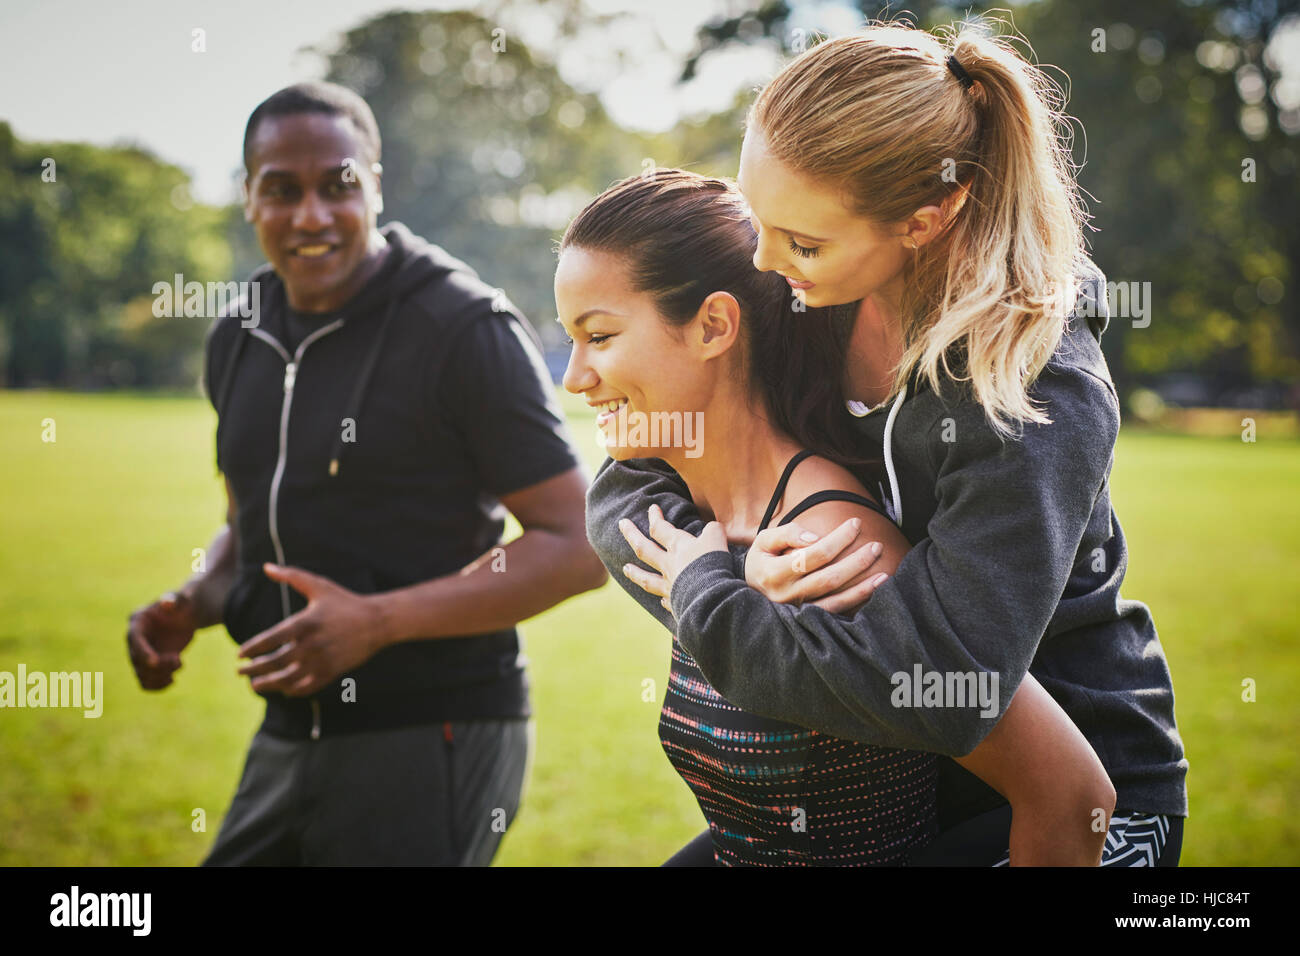 Personal trainer encouraging two women piggy backing in park Stock Photo